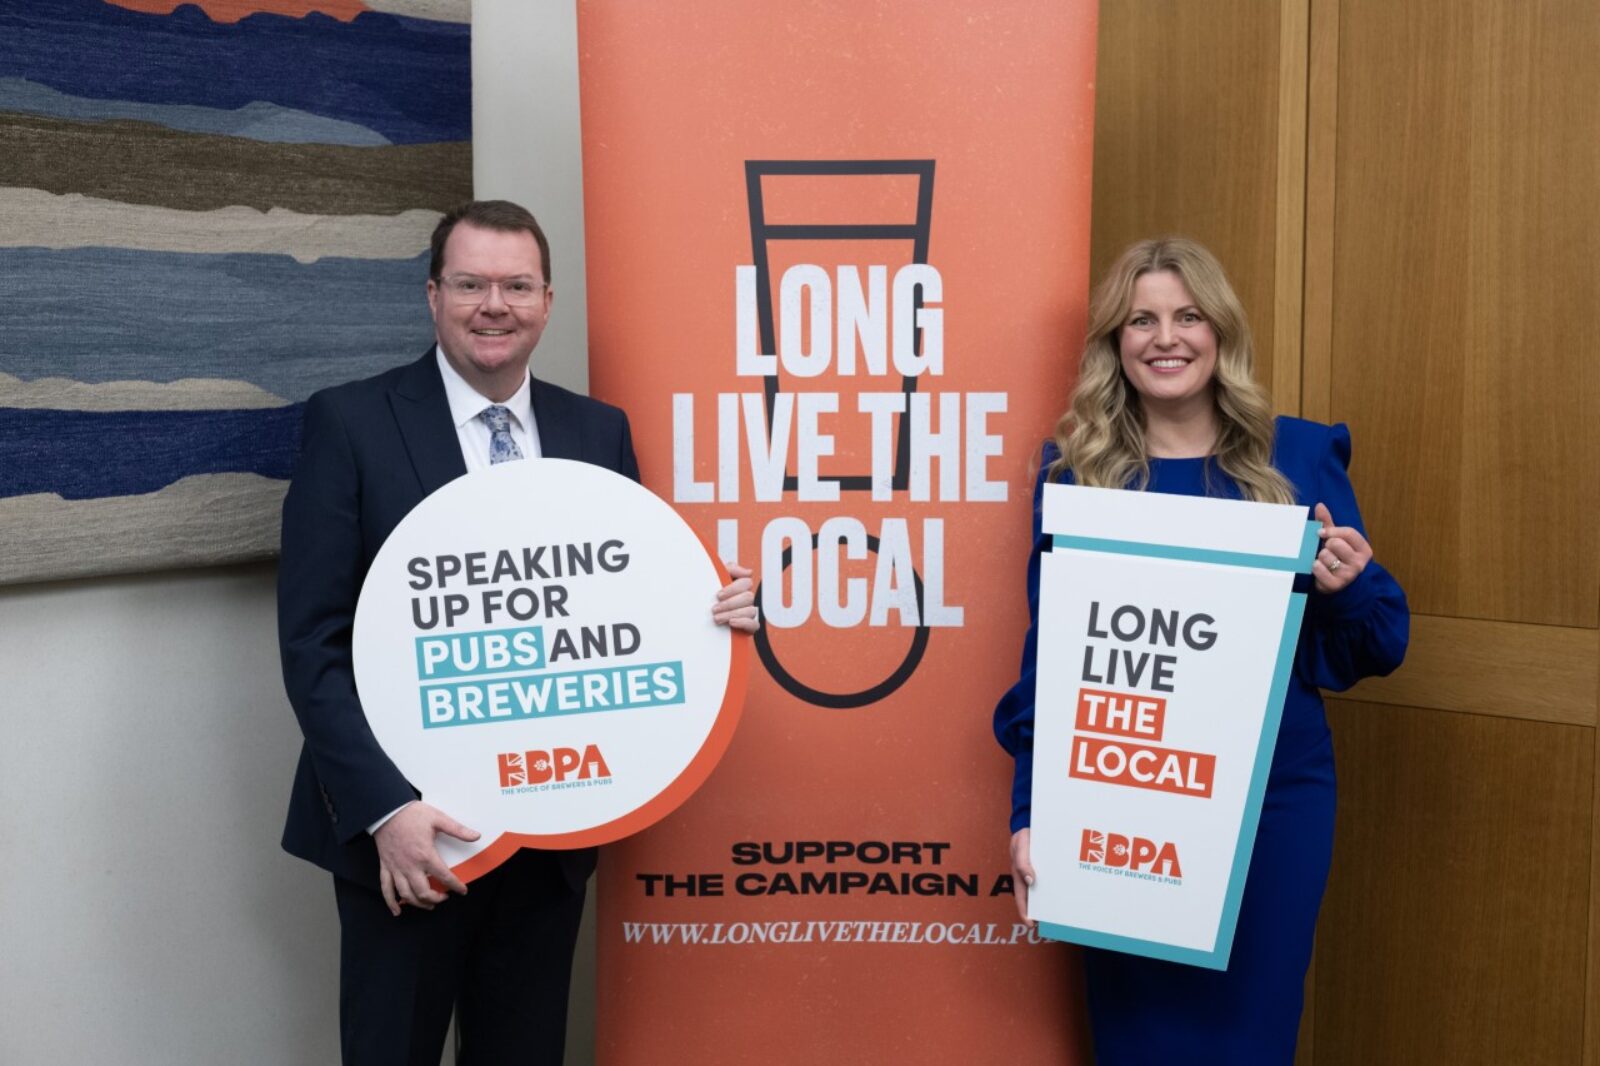 Conor Pictured with Long Live The Local Sign